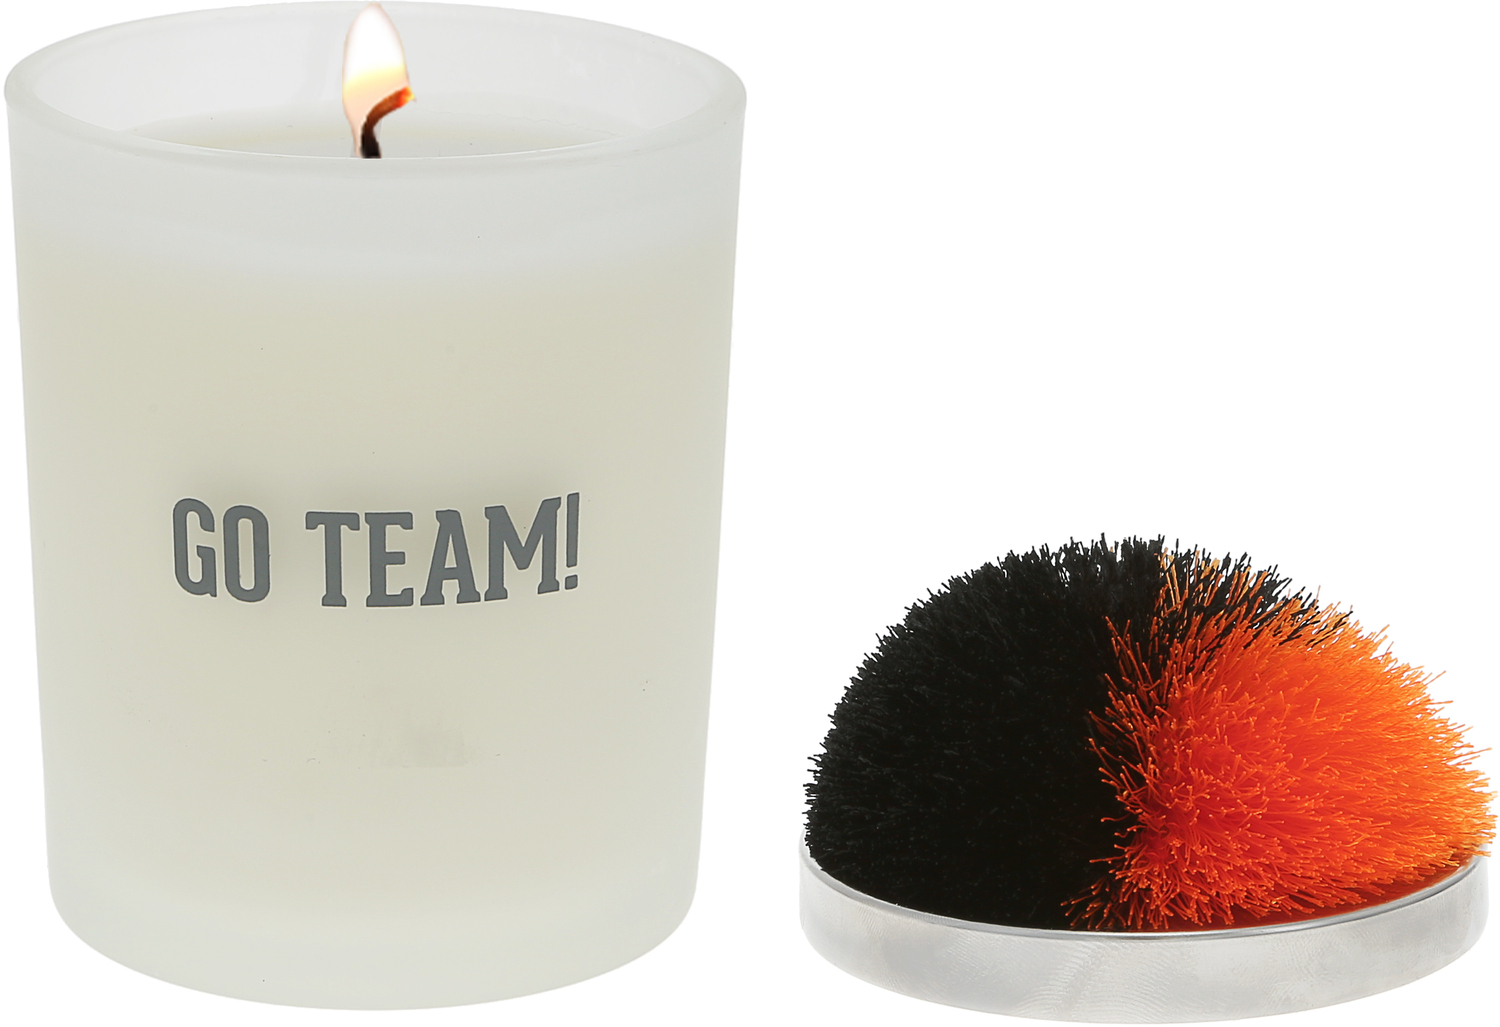 Go Team! - Black & Orange by Repre-Scent - Go Team! - Black & Orange - 5.5 oz - 100% Soy Wax Candle with Pom Pom Lid
Scent: Tranquility